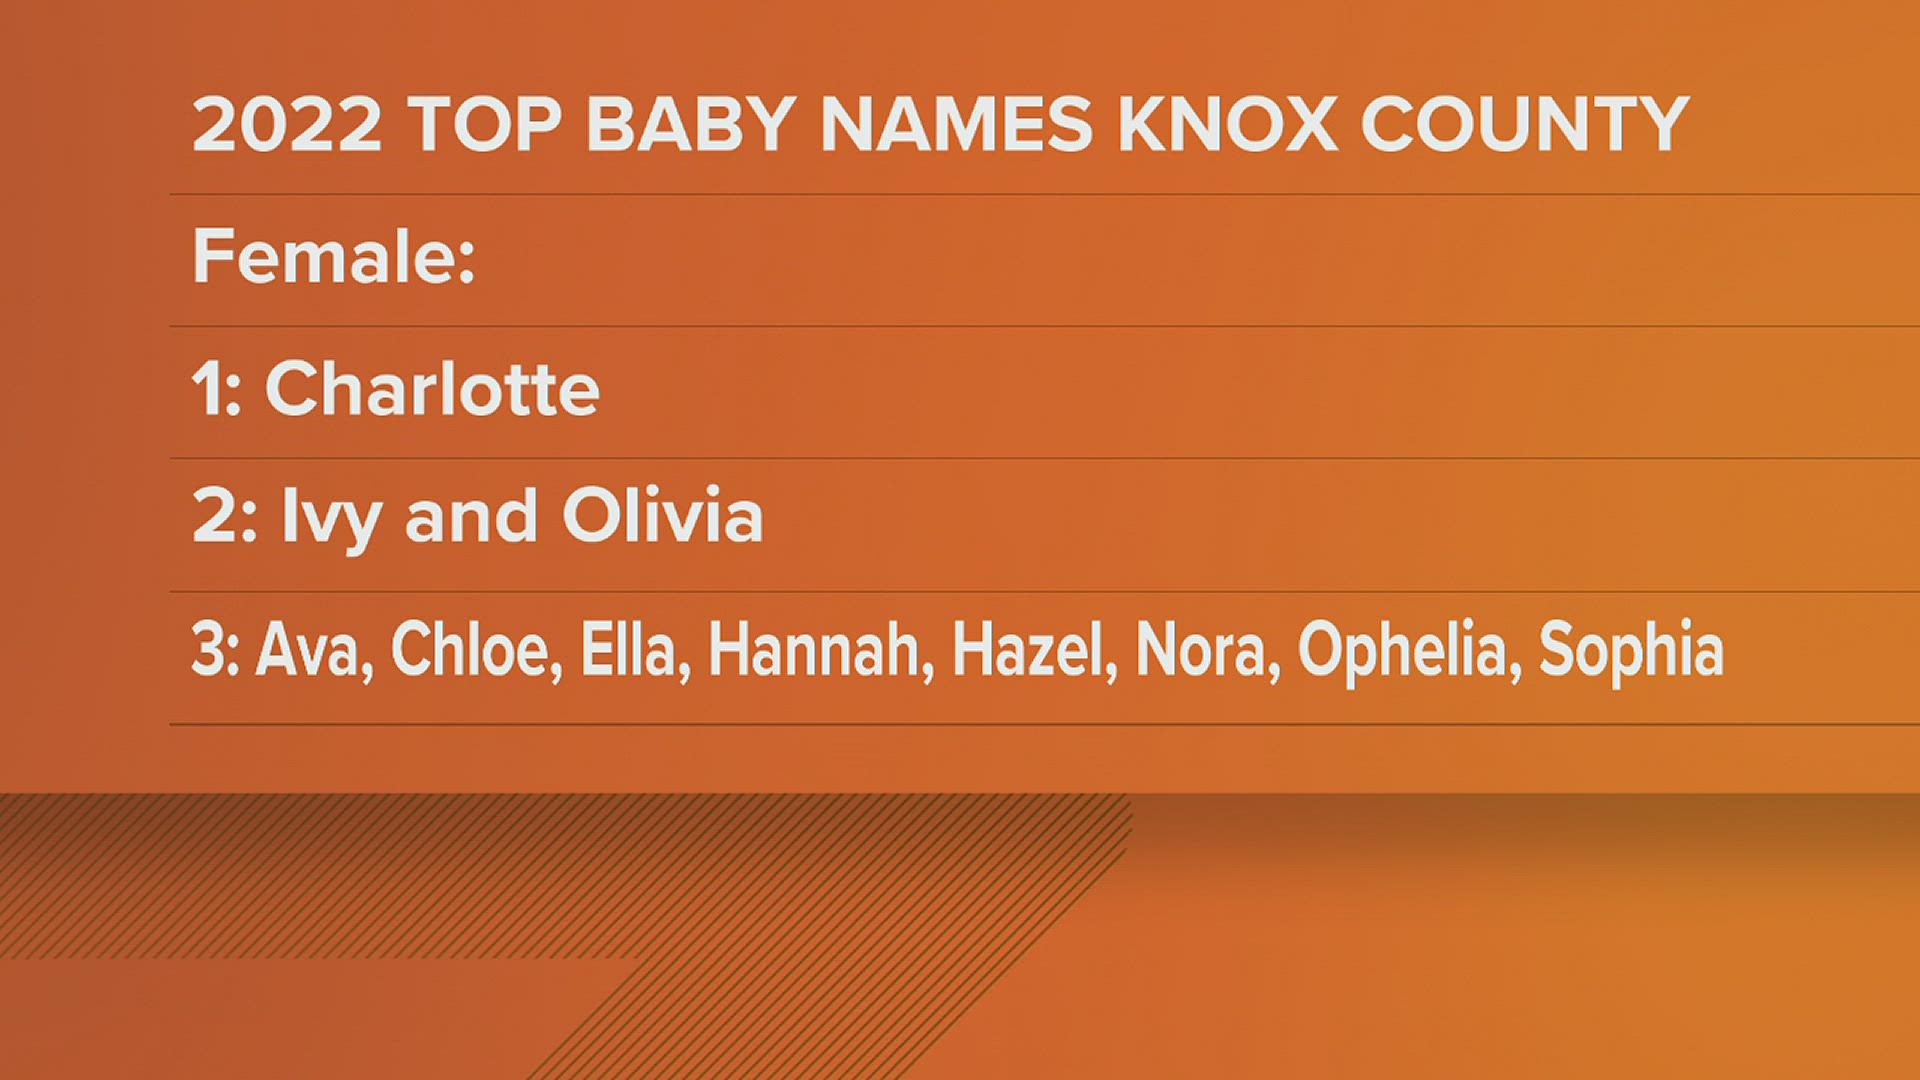 Knox County says their top names for newborns in the 2022 year are Charlotte, Ivy and Olivia for girls. For boys, the top names were Kai and Theodore.